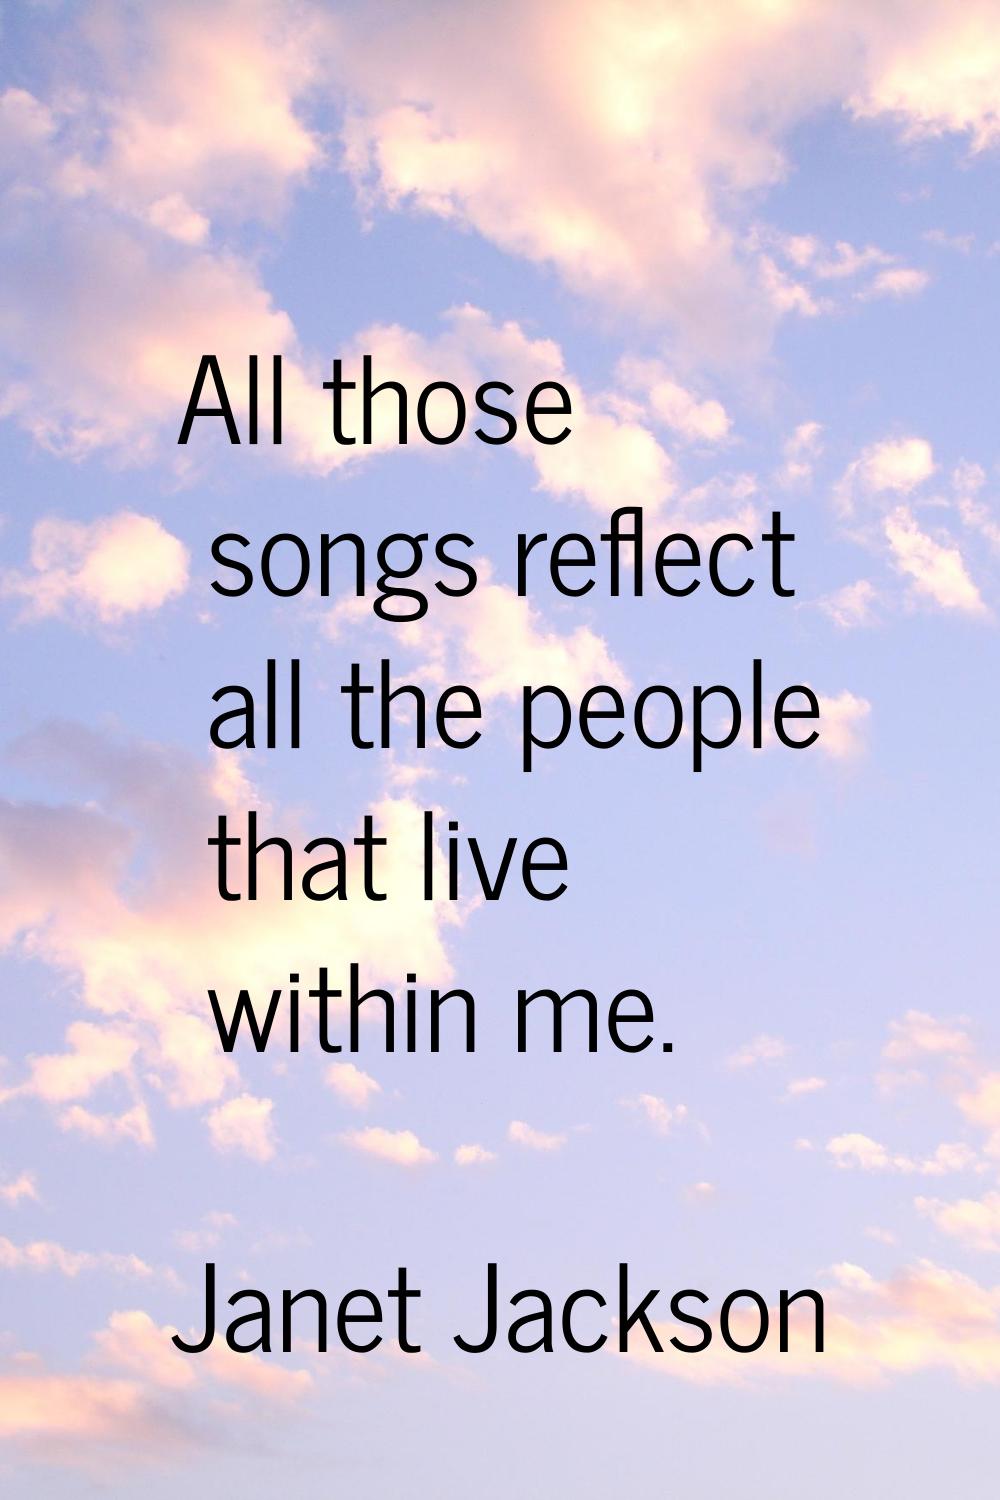 All those songs reflect all the people that live within me.